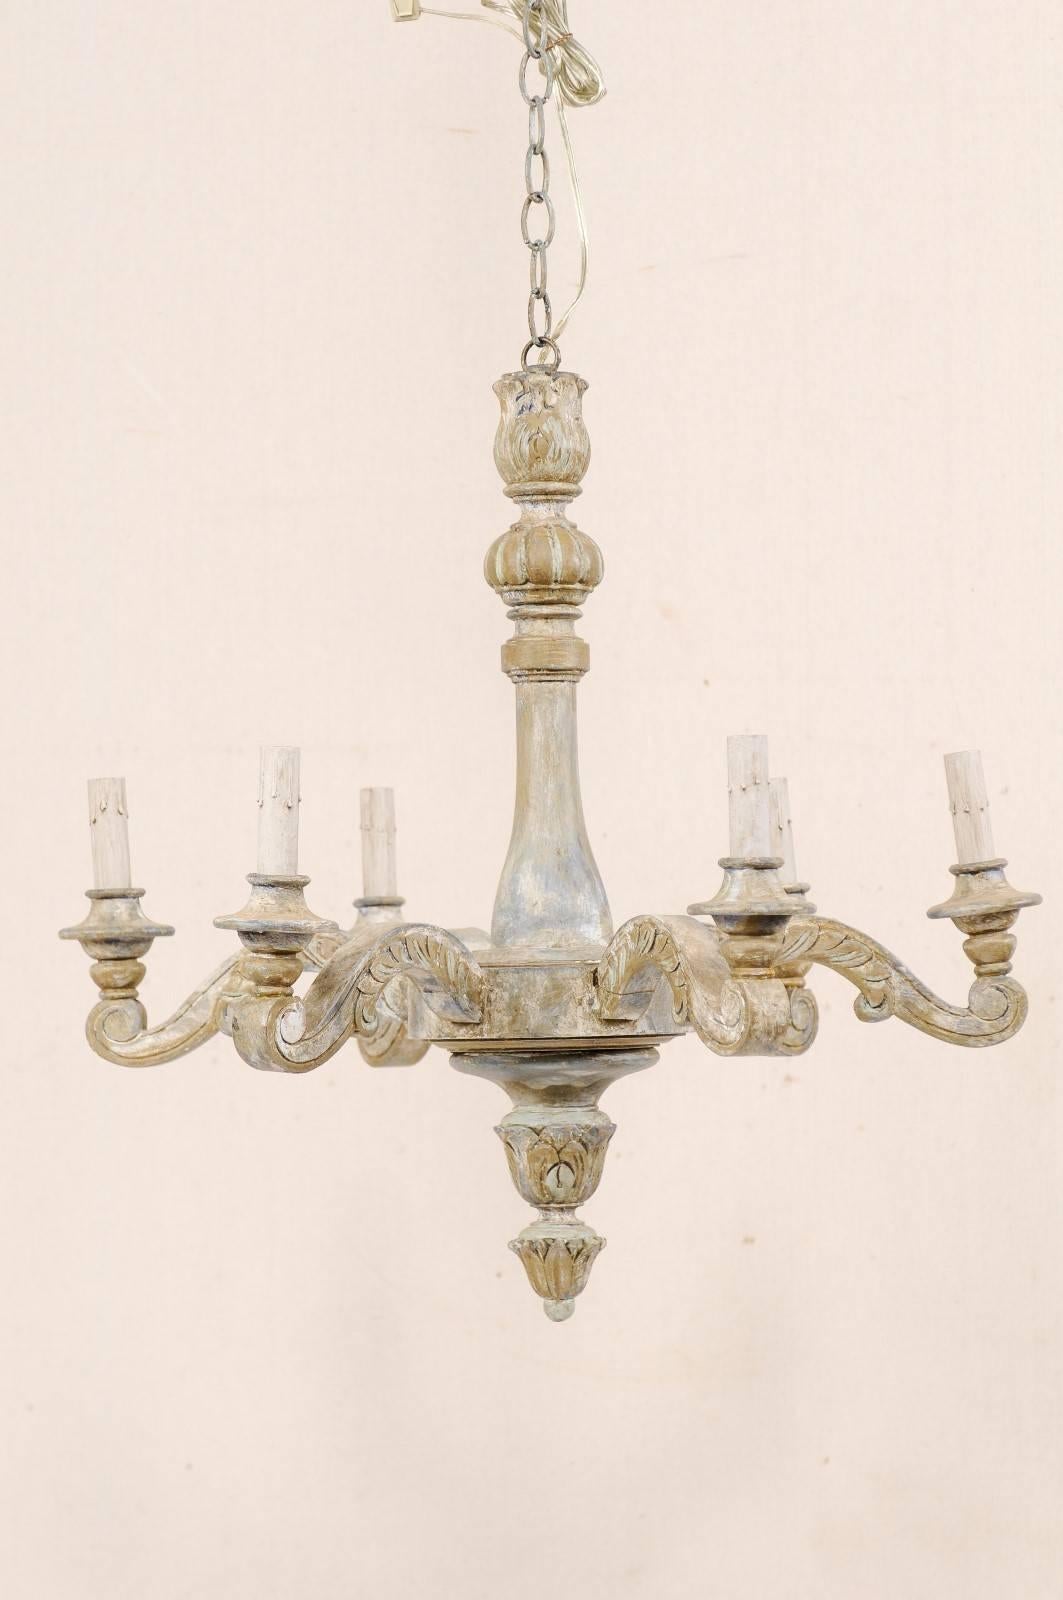 A vintage French painted wood six-light chandelier. This French chandelier from the mid-20th century features a central column body with carved foliage motif and a circular belly from which six scrolled and carved acanthus leaf wrapped arms extend